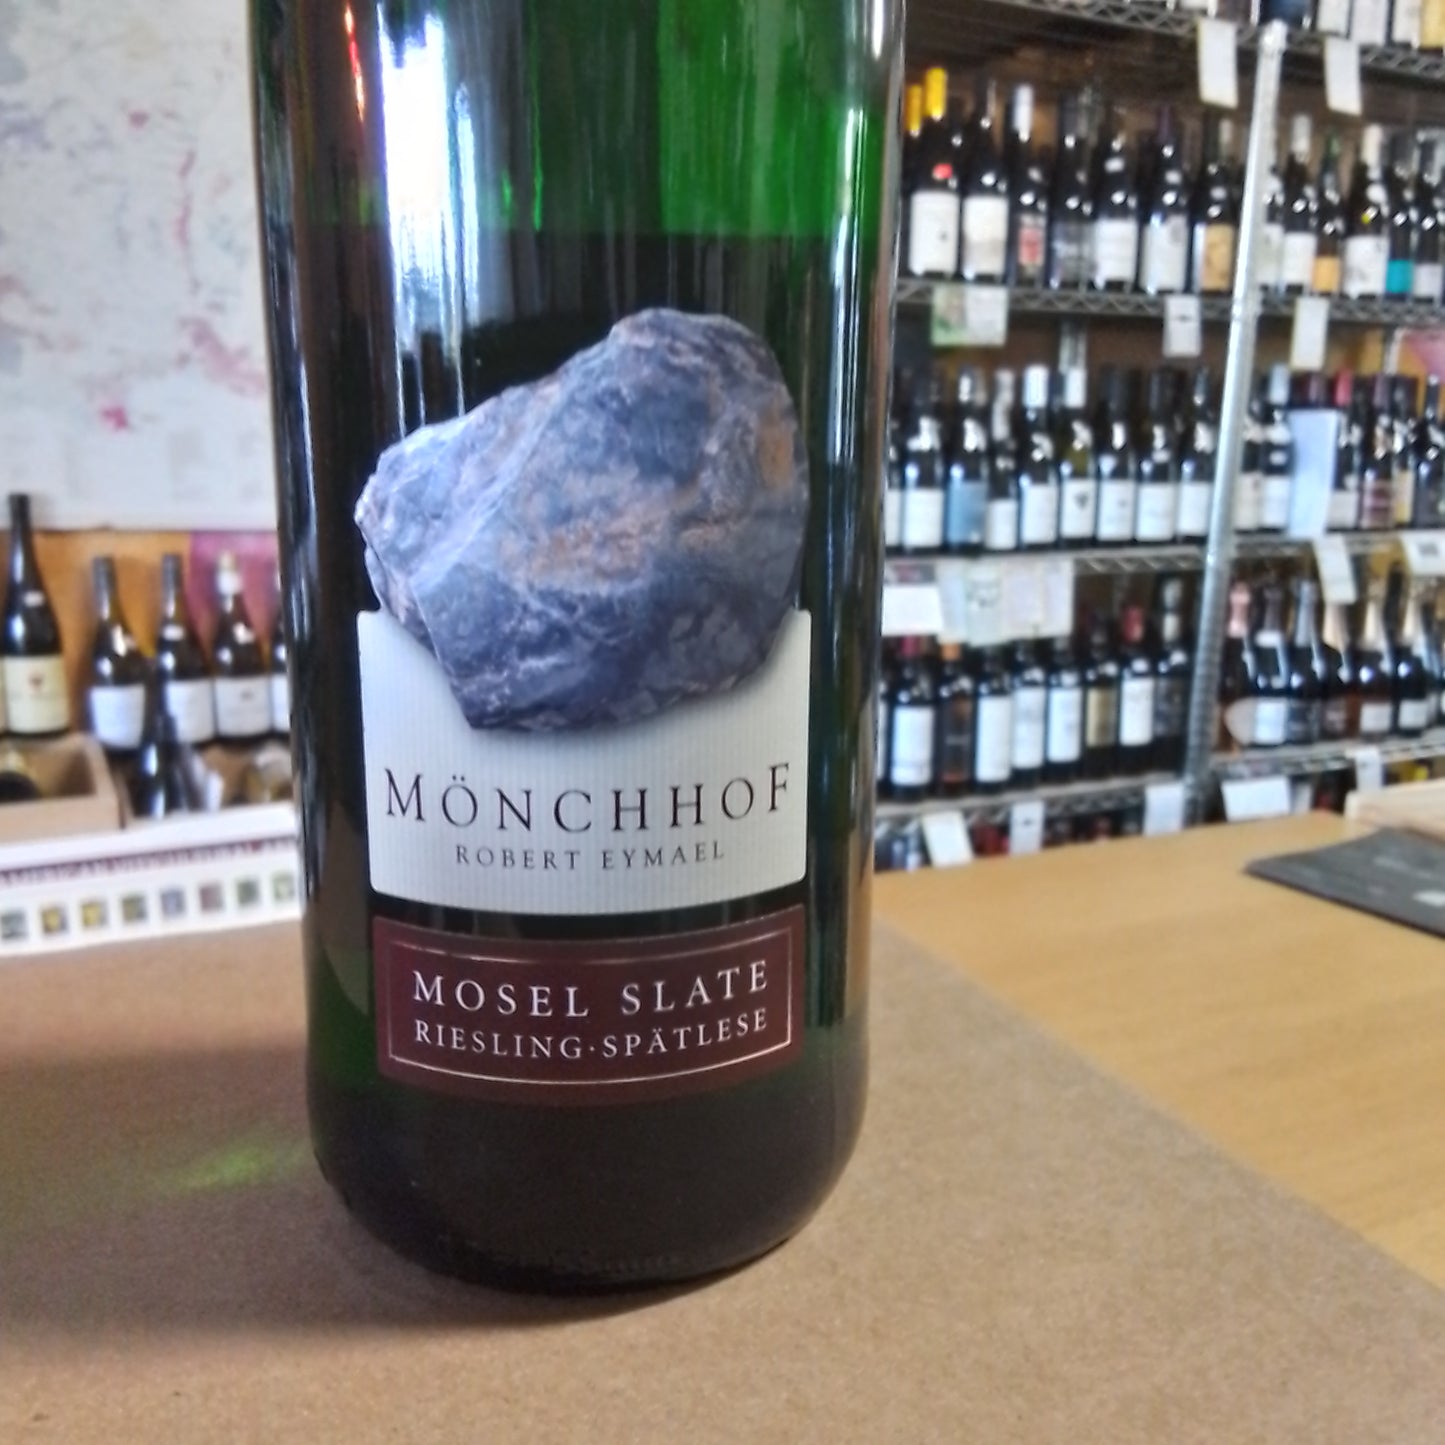 MOENCHHOF 2021 Riesling (Mosel, Germany)